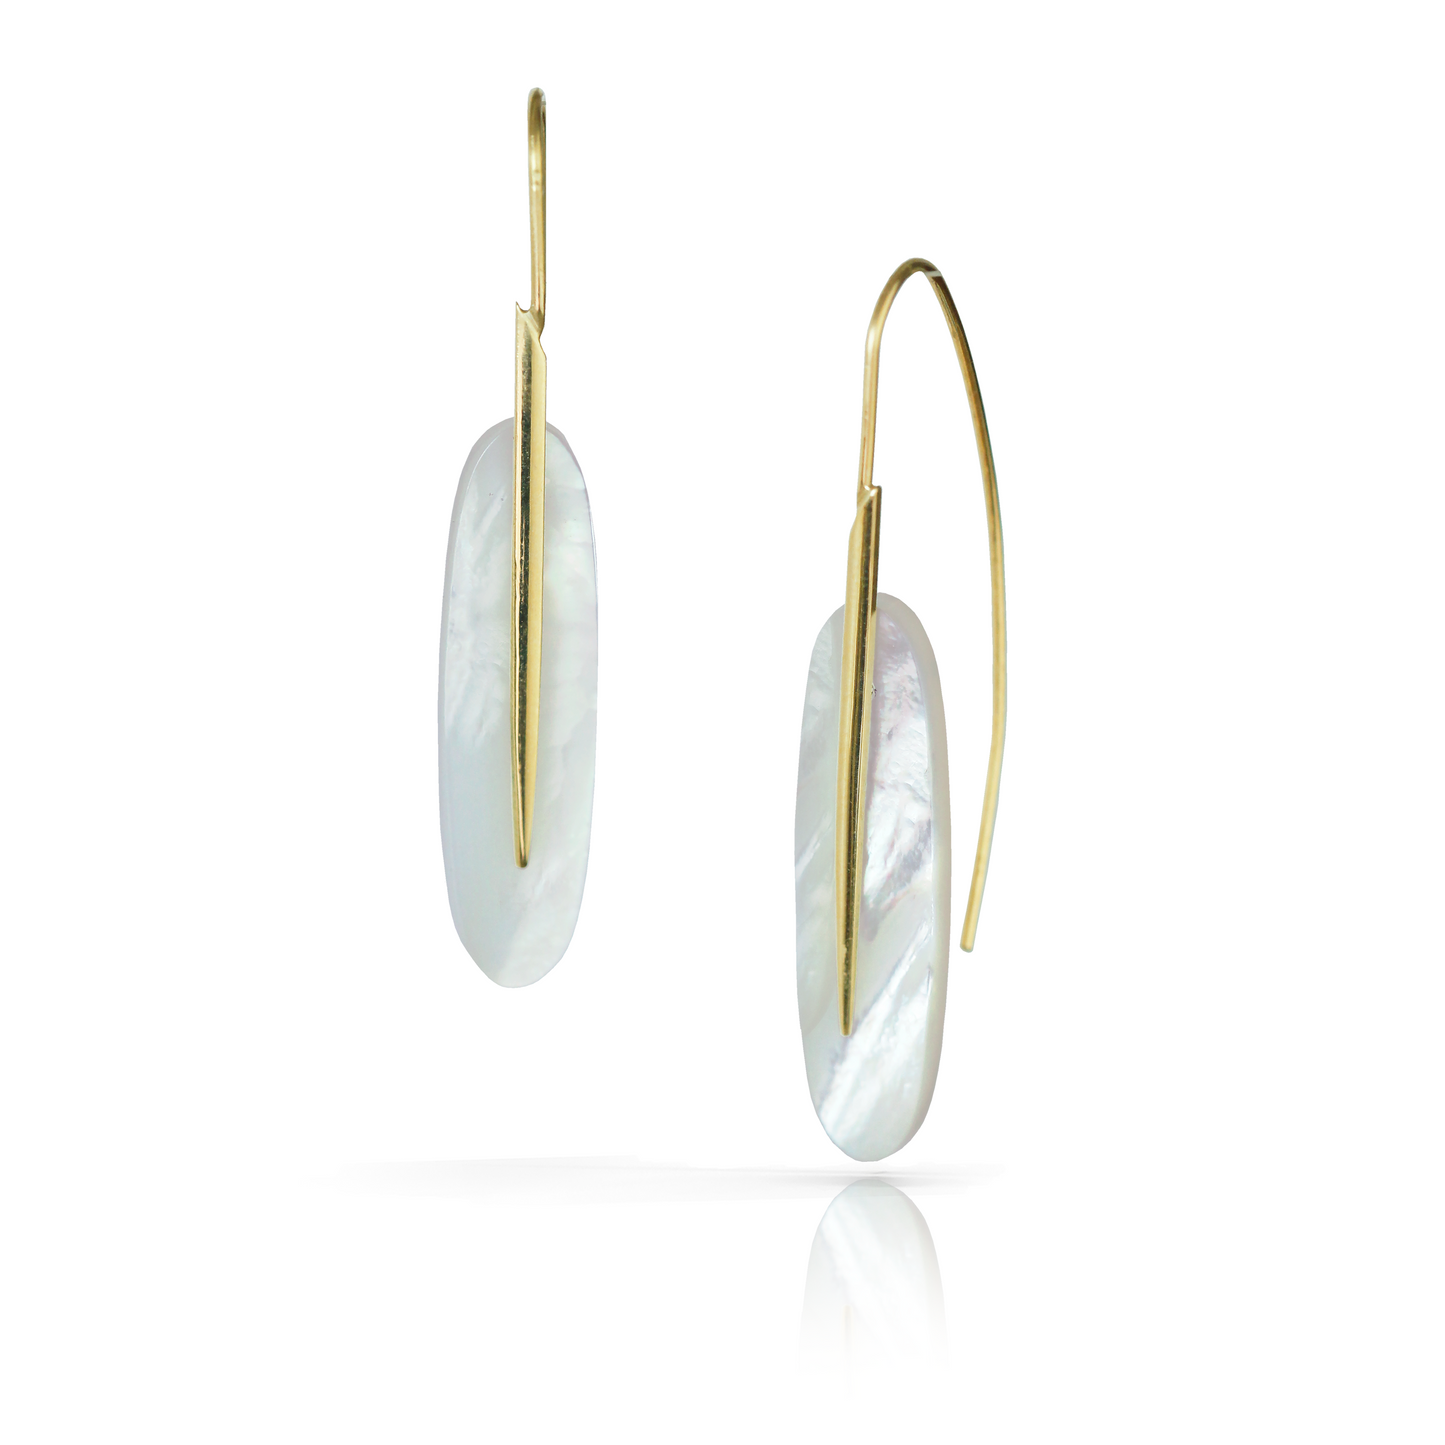 Medium Feather Earrings in 18k Gold and White Mother of Pearl